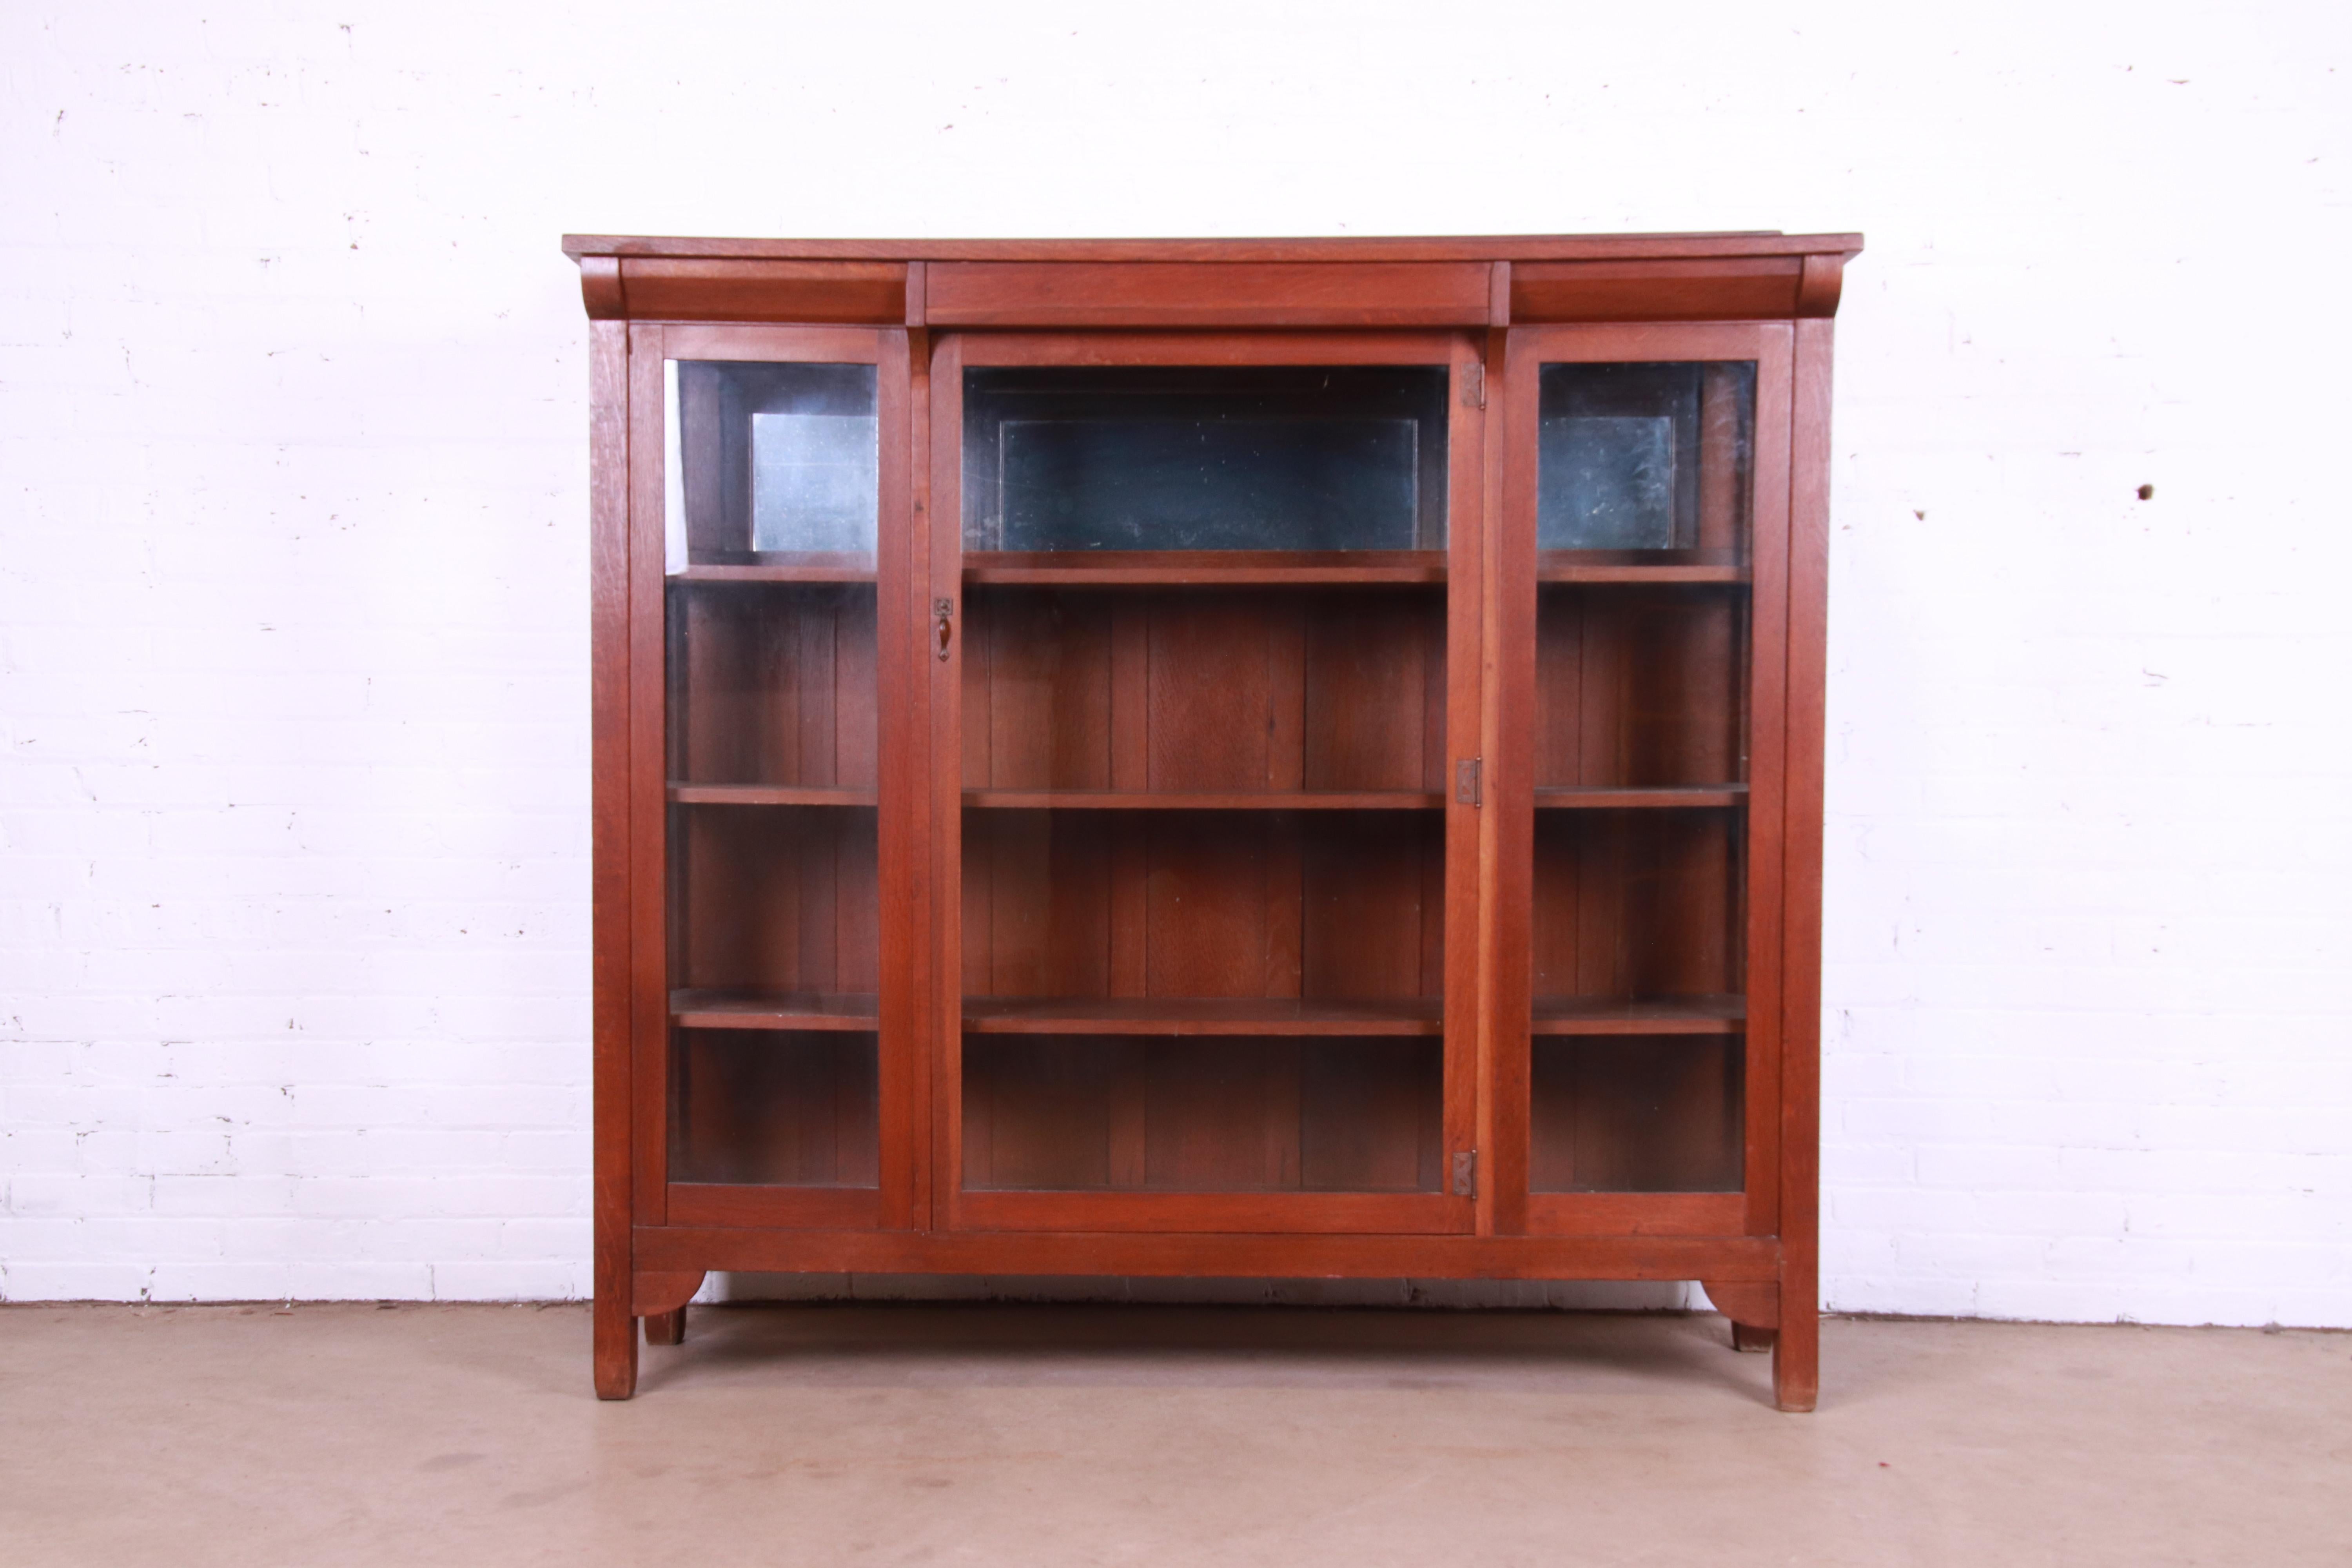 A gorgeous antique Arts & Crafts bookcase or display cabinet

By Stickley Brothers

USA, Circa 1900

Carved quarter sawn oak, with glass front doors and sides, mirrored back on top shelf, and copper hardware.

Measures: 65.5